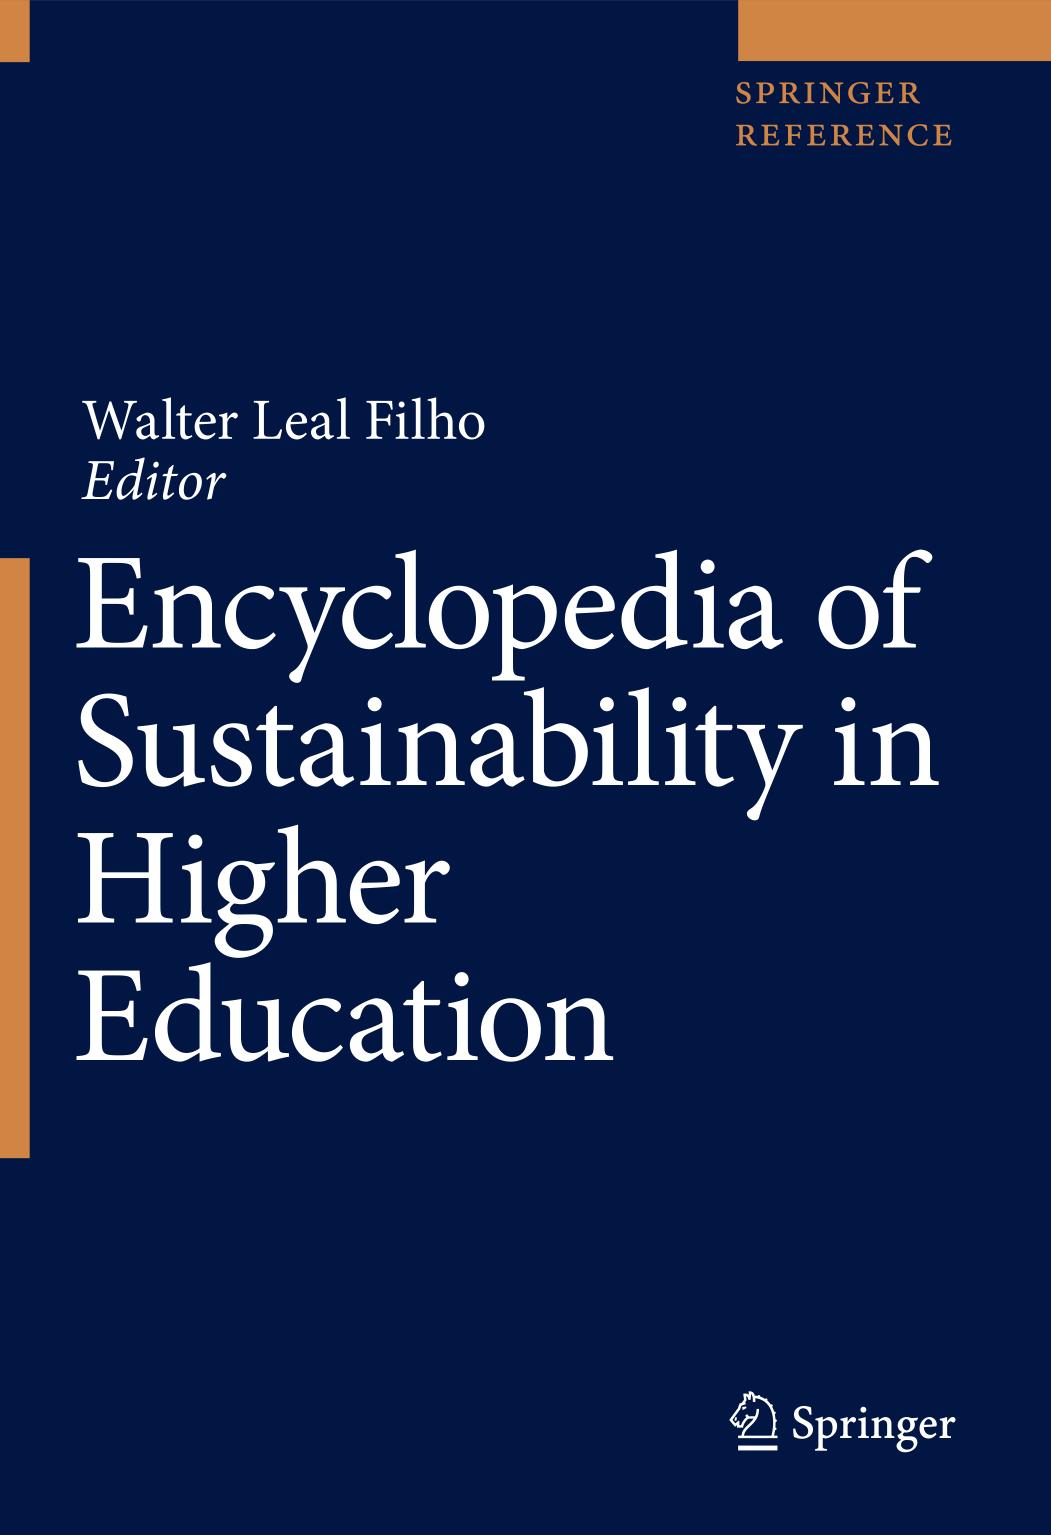 Encyclopedia of Sustainability in Higher Education